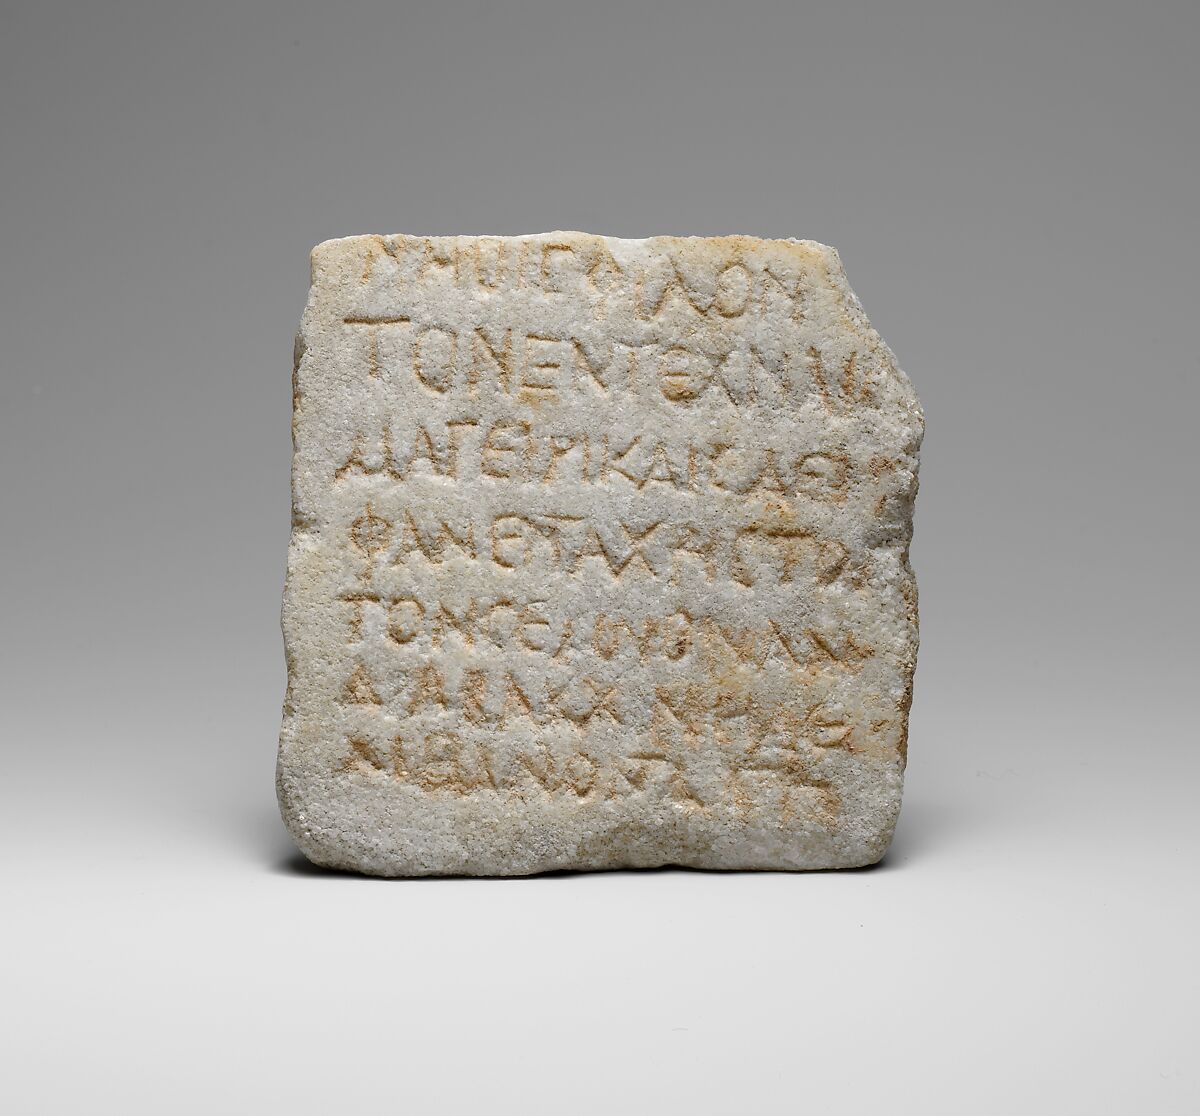 Inscribed marble plaque, Marble, Roman, Cypriot 